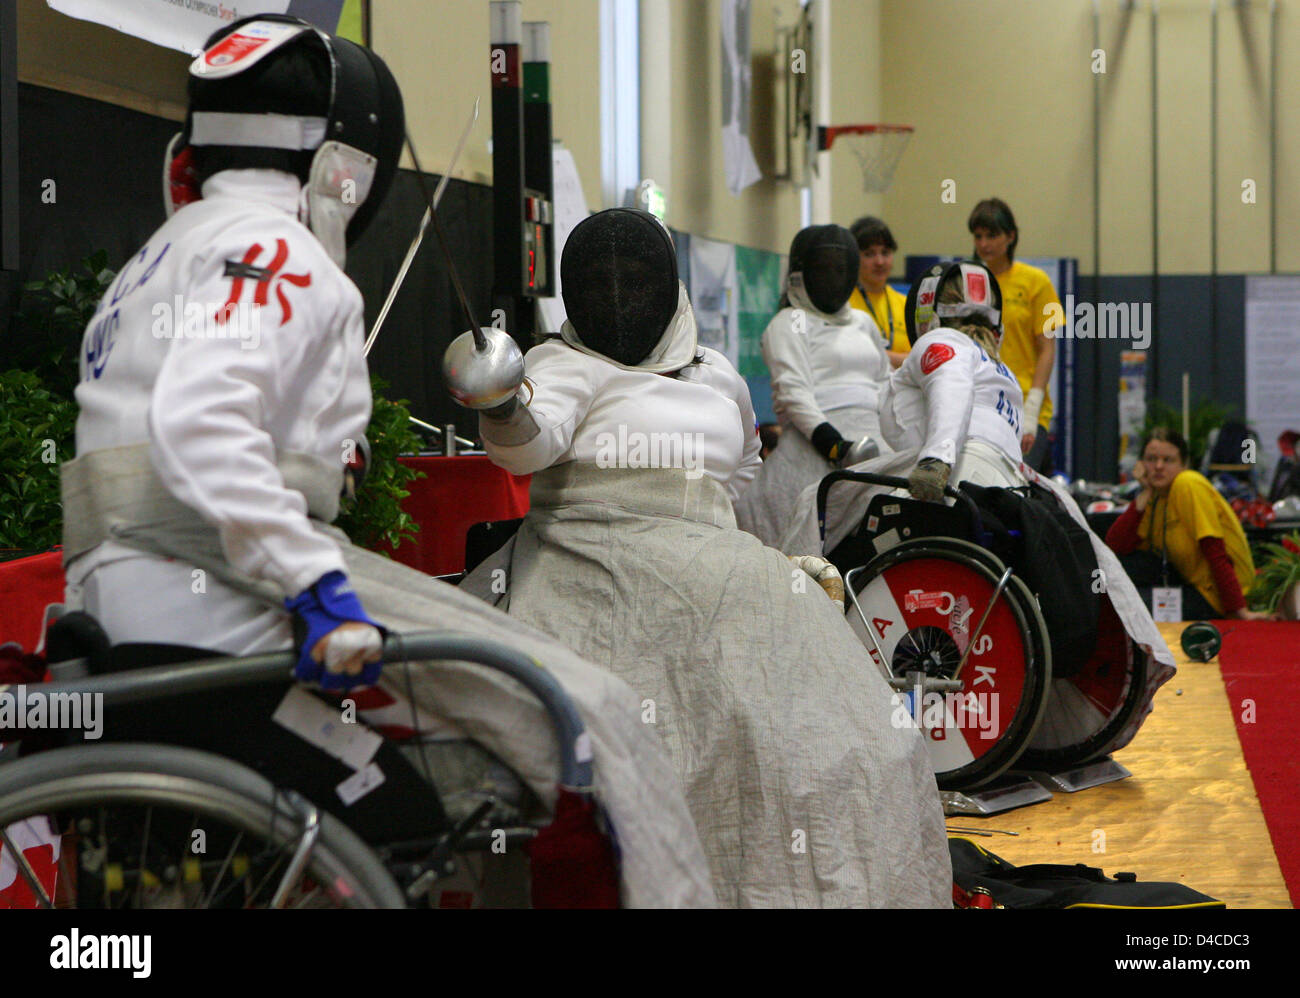 Wheel chair fencers shown in action during a preliminary round fight at the Wheel Chair World Cup in Malchow, Germany, 18 January 2008. Until Sunday 20 January 2008 113 athletes from 21 countries compete at  the World Cup event, which resembles a final chance to qualify for the Paralympics in Beijing. Photo: BERND WUESTNECK Stock Photo